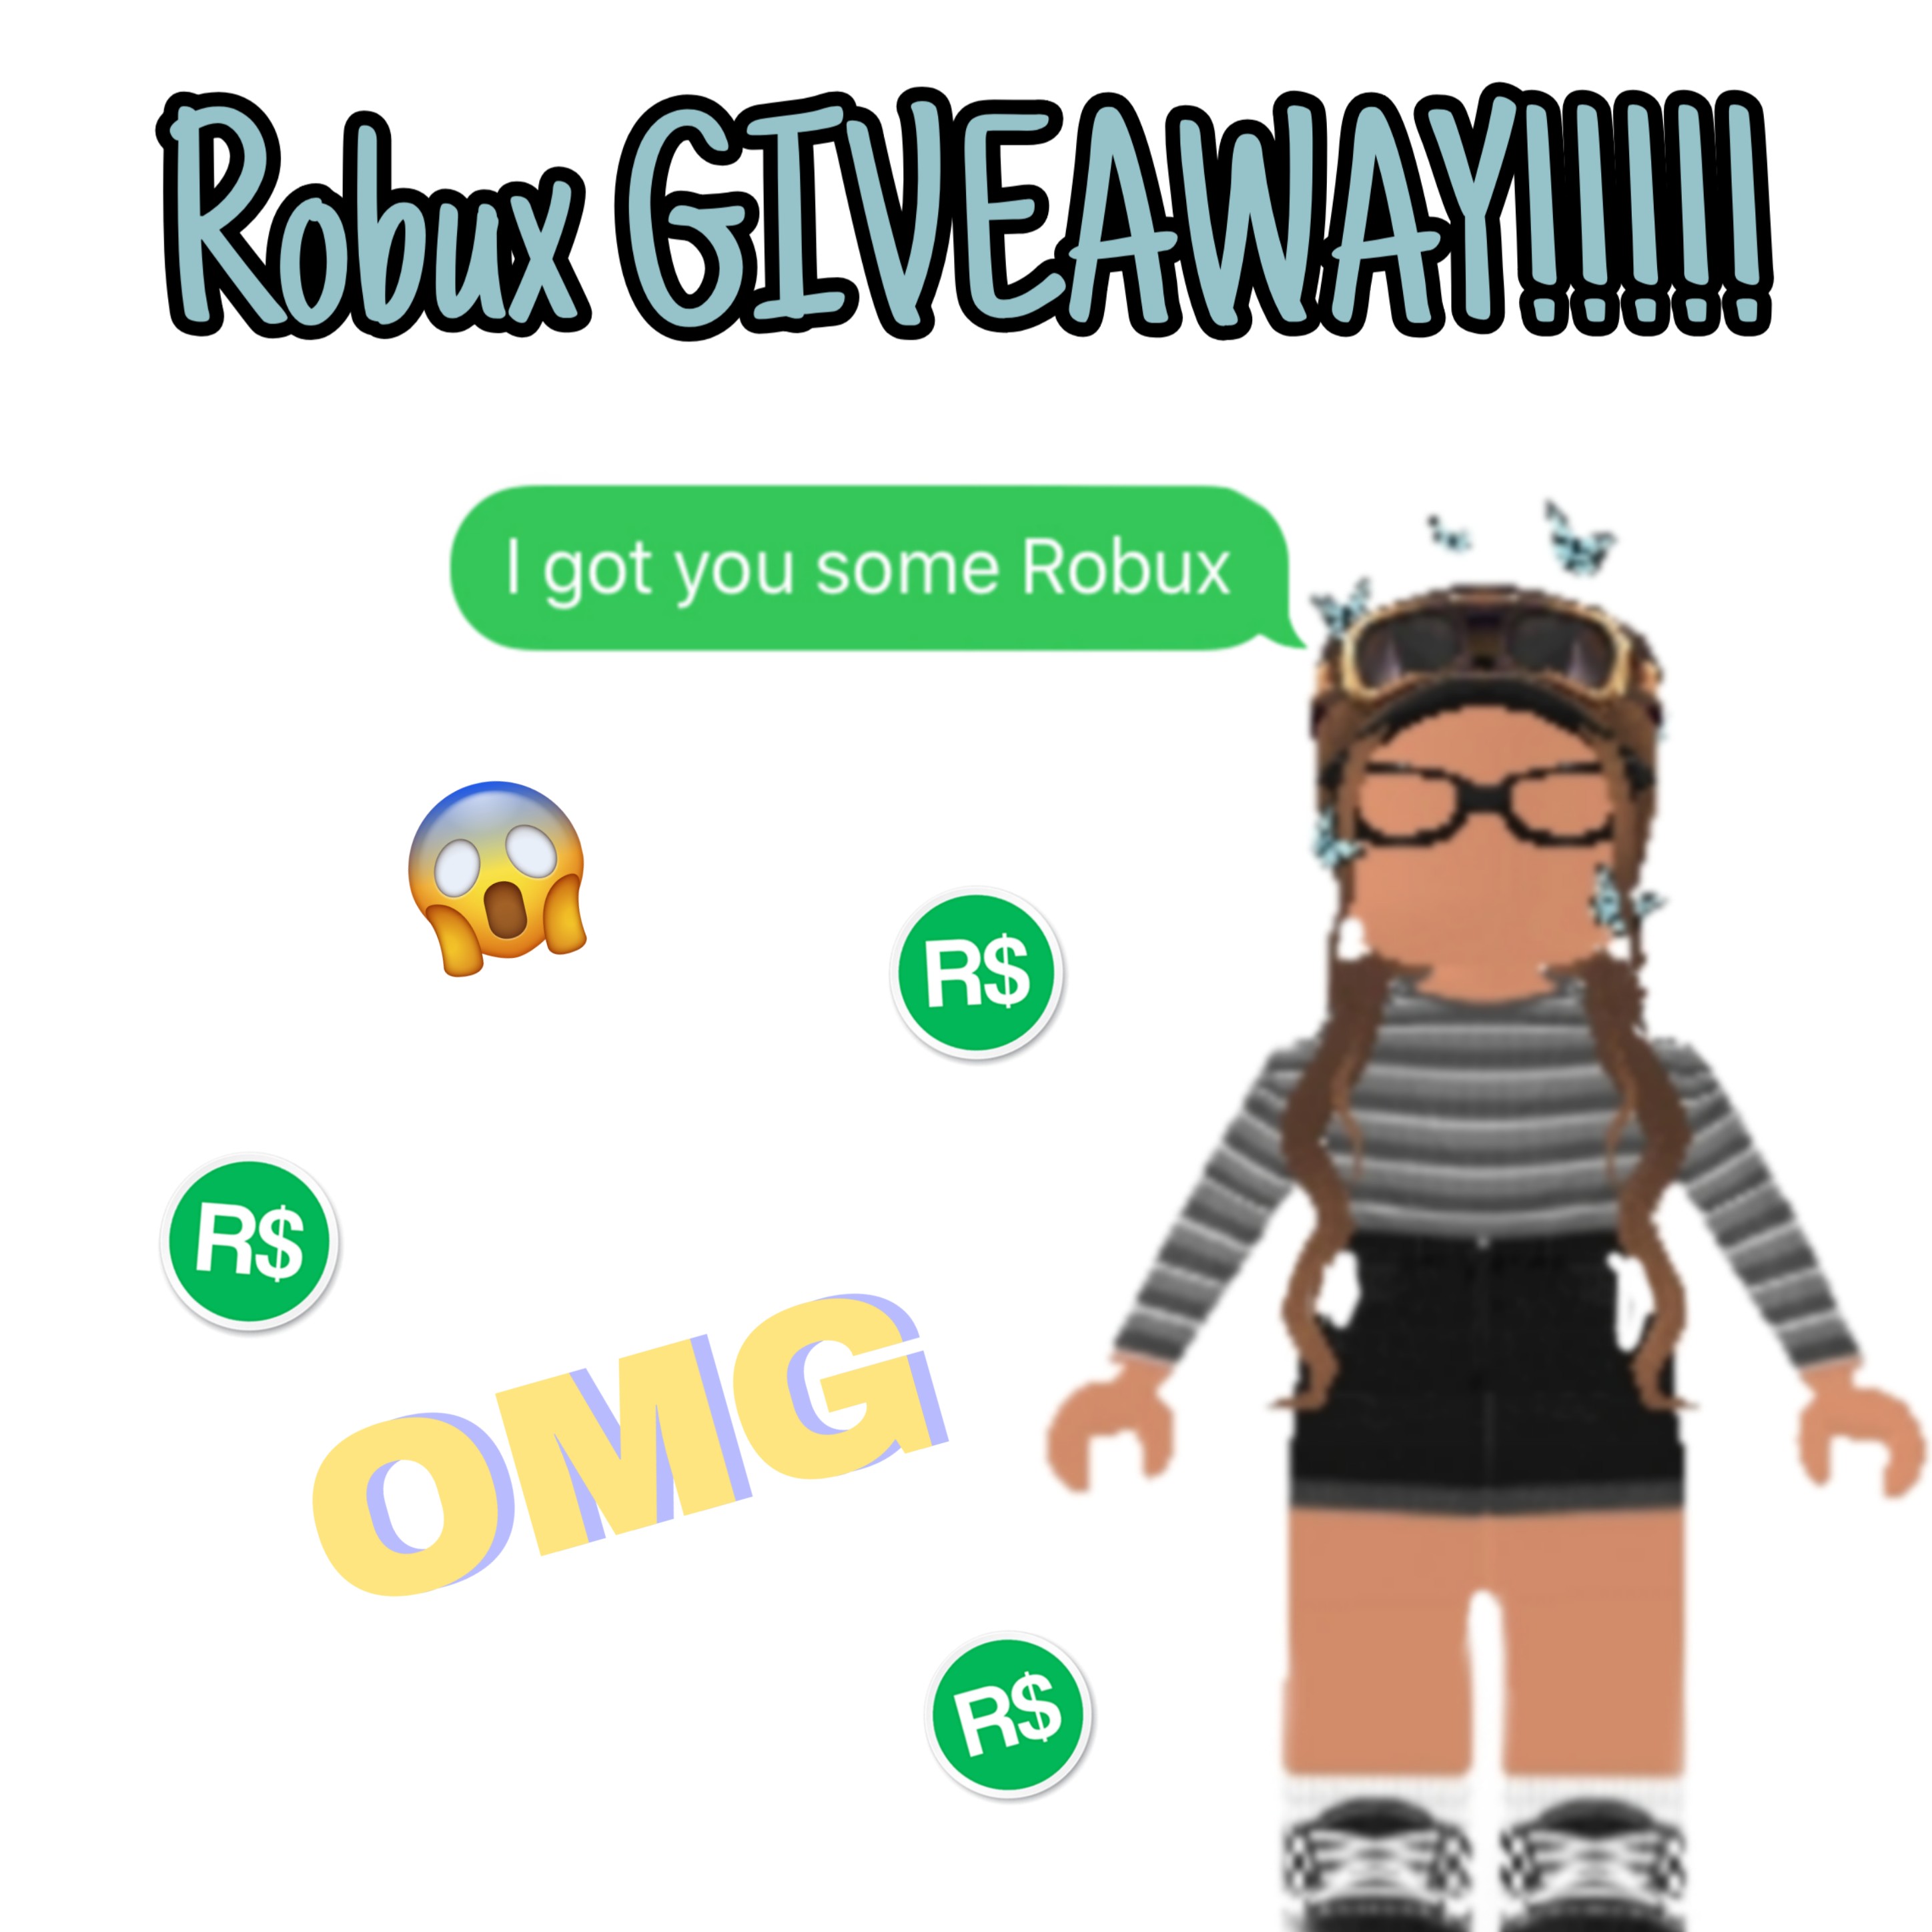 Roblox Robux Giveaway Subscribe To Image By Azlynn - roblox giveaway giving away 500 robux youtube